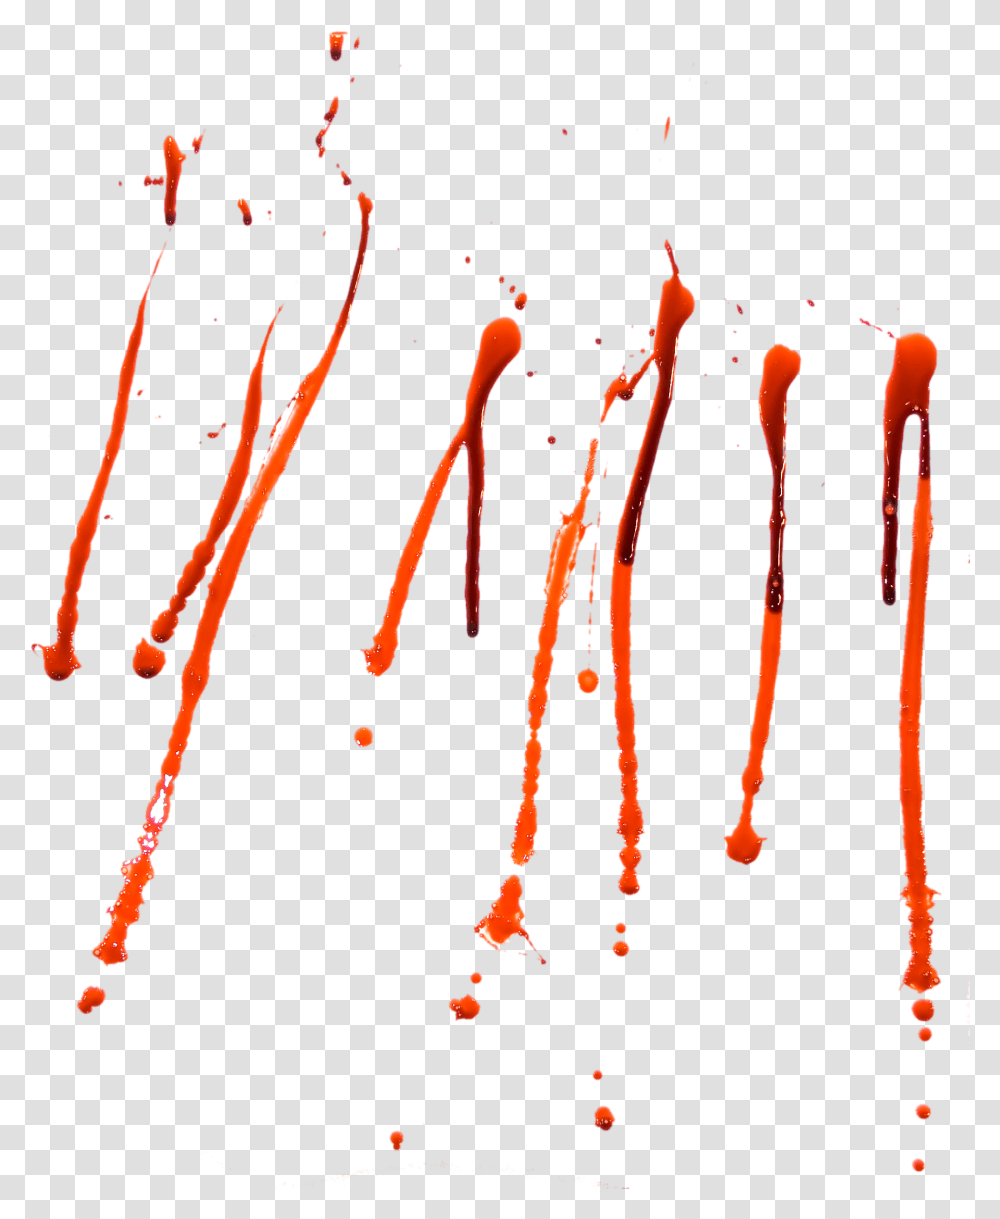 Blood Images Free Download Blood Splashes, Outdoors, Stain, Musical Instrument, Tie Transparent Png